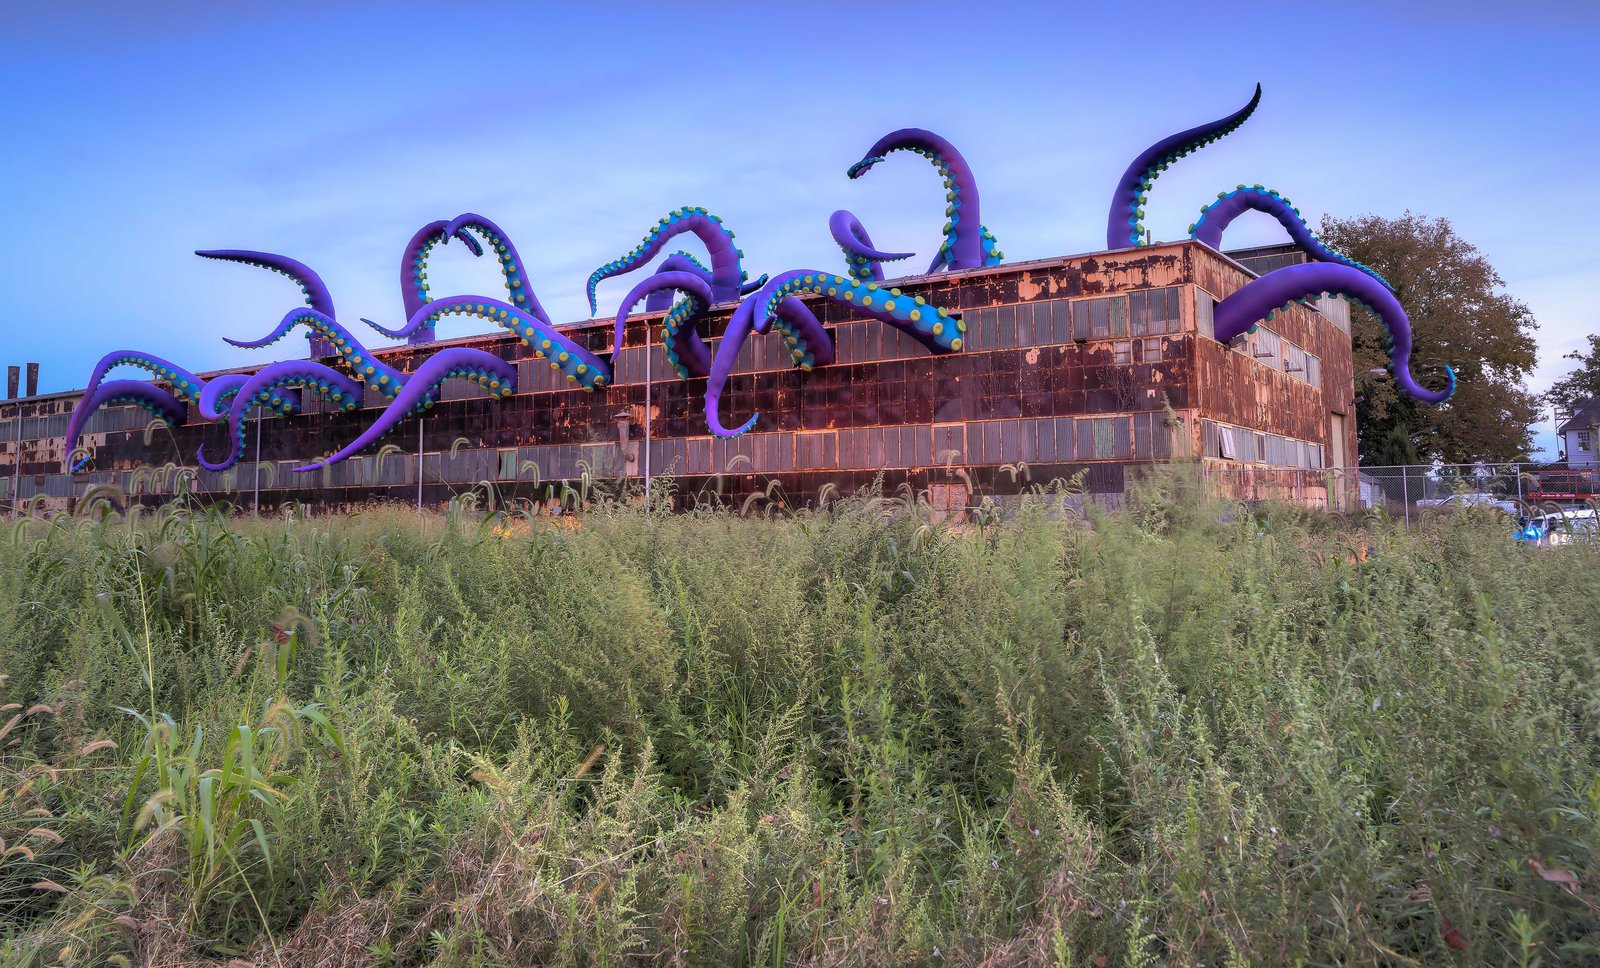 Giant purple and green tentacles swarm out what looks to be an abandoned factory ina grassy field